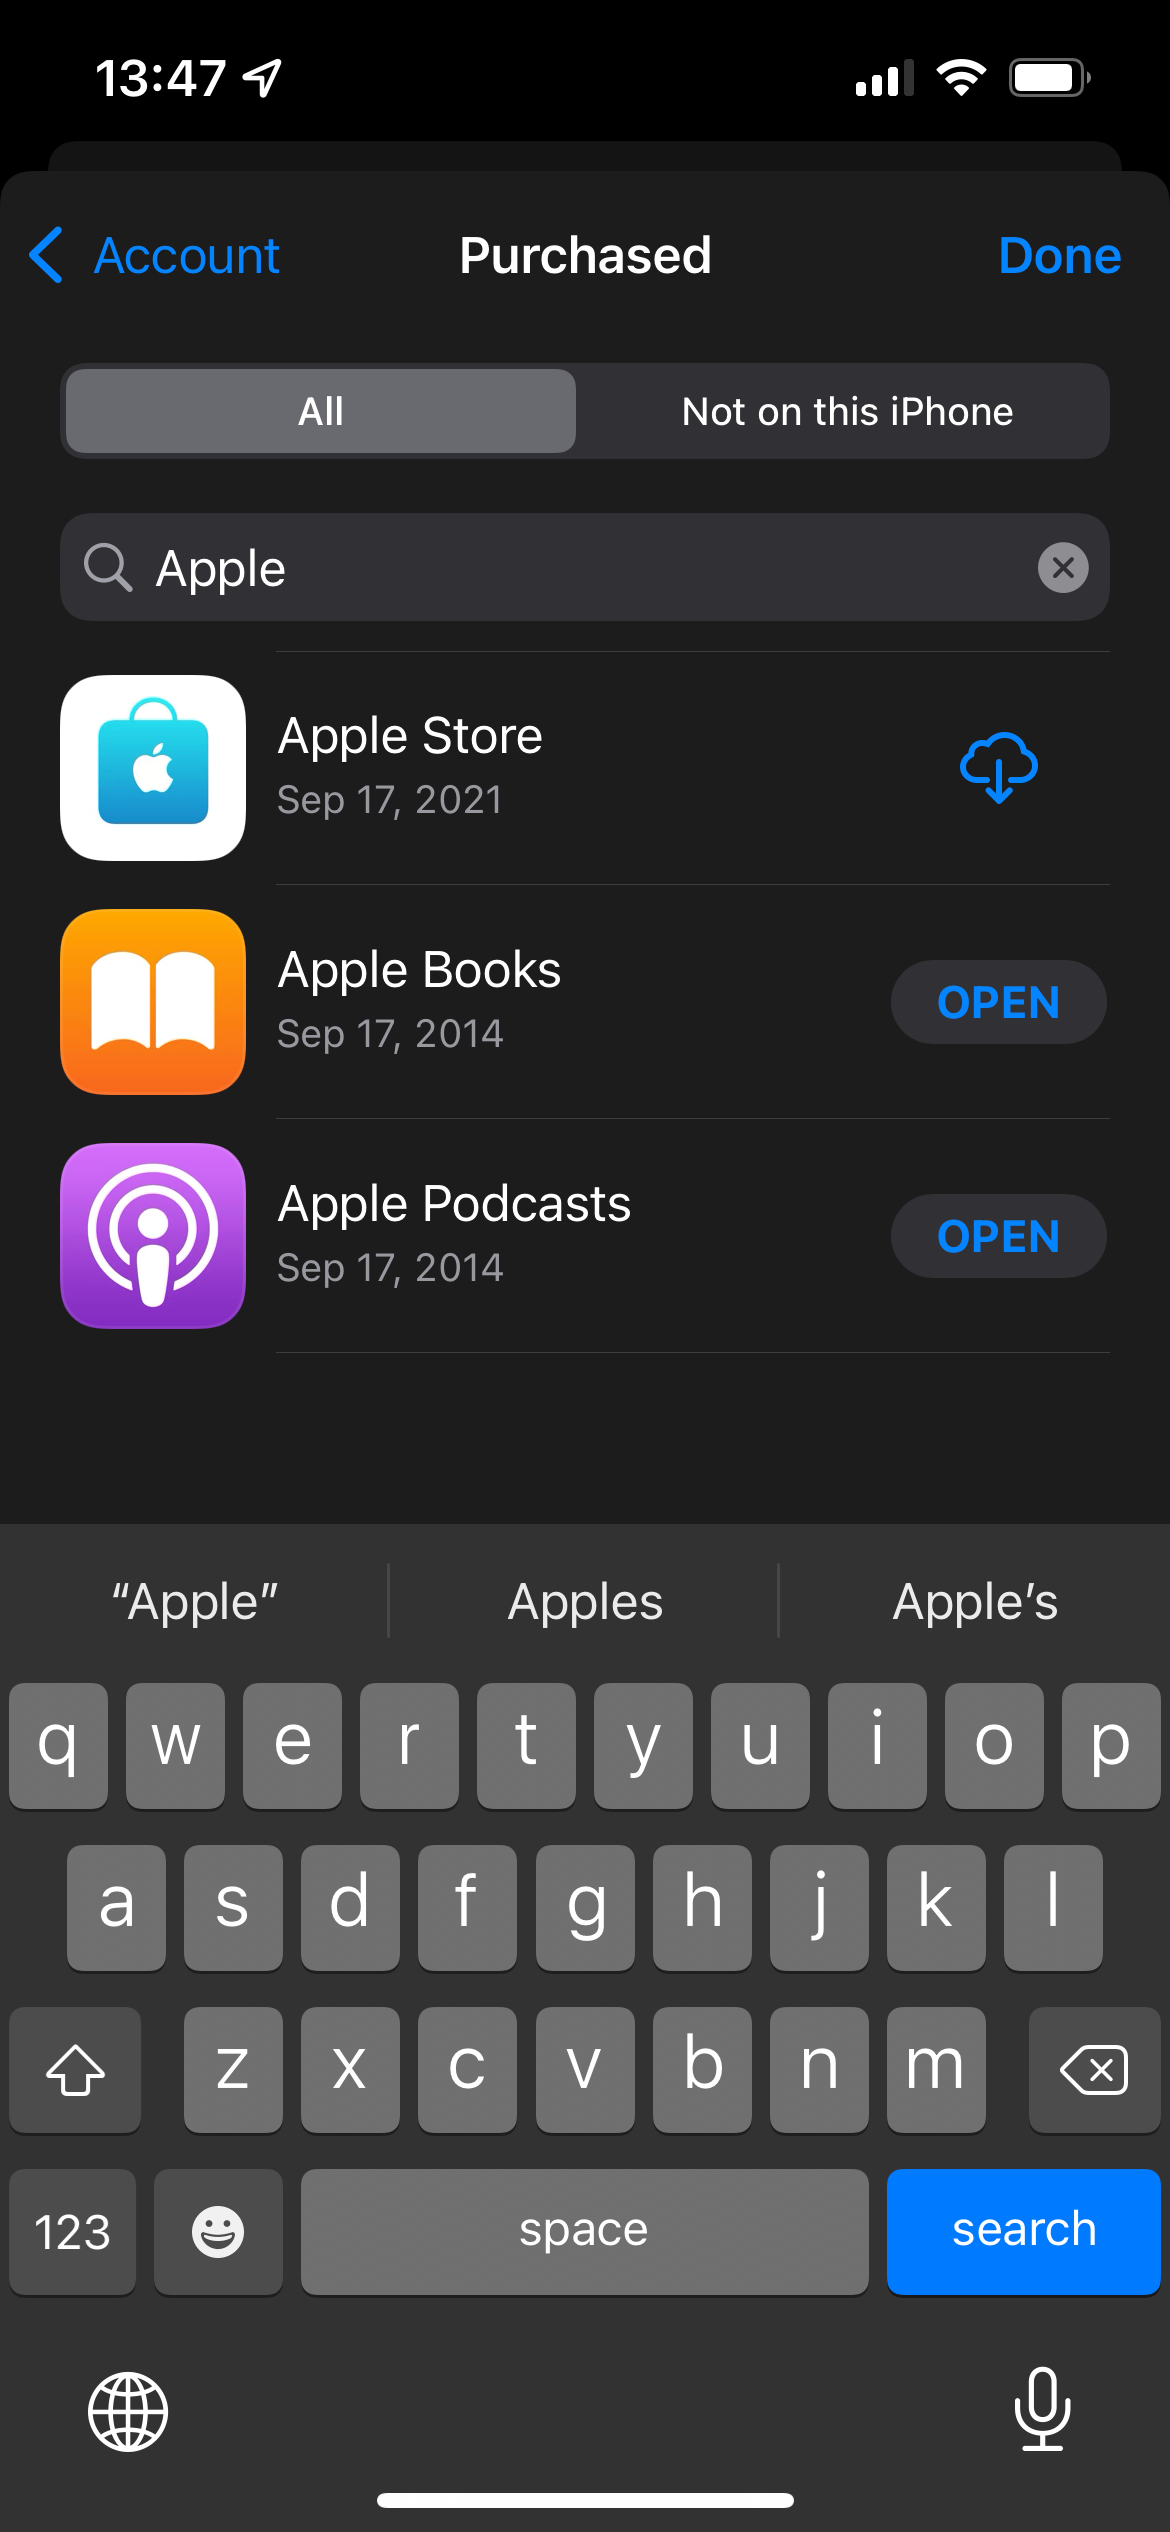 App Store Purchased Apps